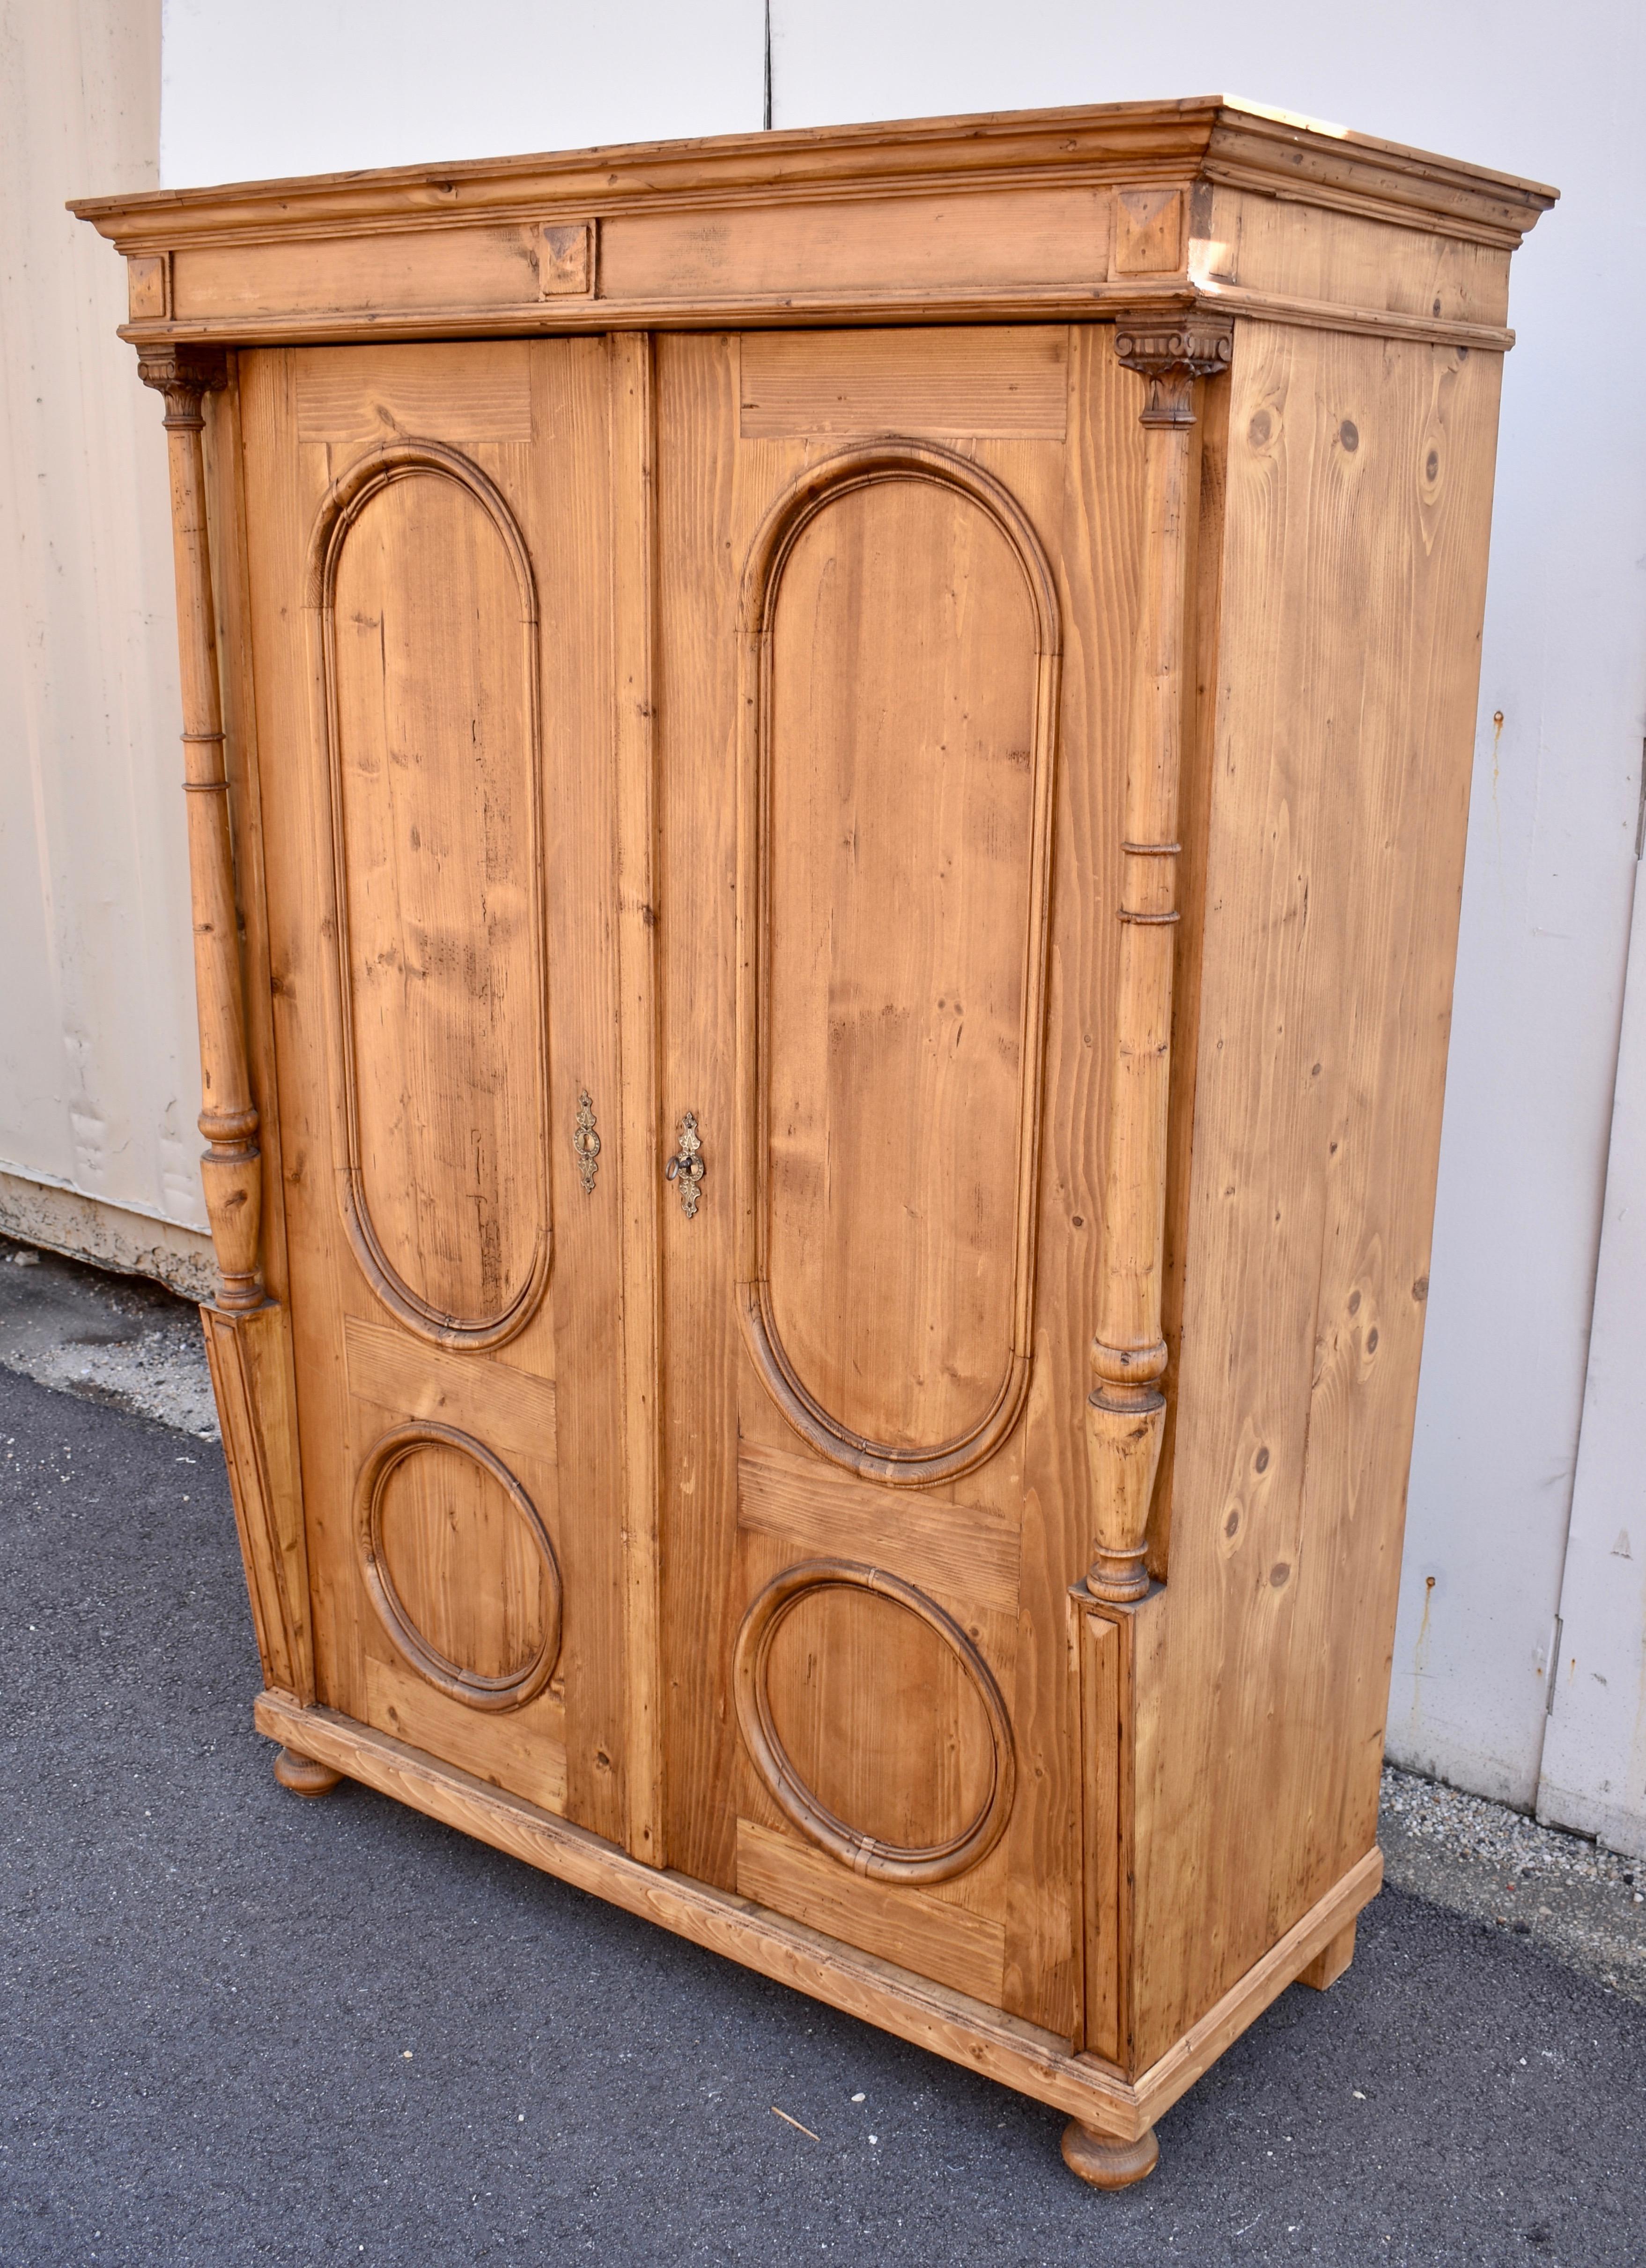 This small armoire has considerable presence.  The bold crown sits above a frieze with three applied pyramids.  This stands proud of the doors as if supported by the full turned columns that adorn the front corners, standing on wedge-shaped bases